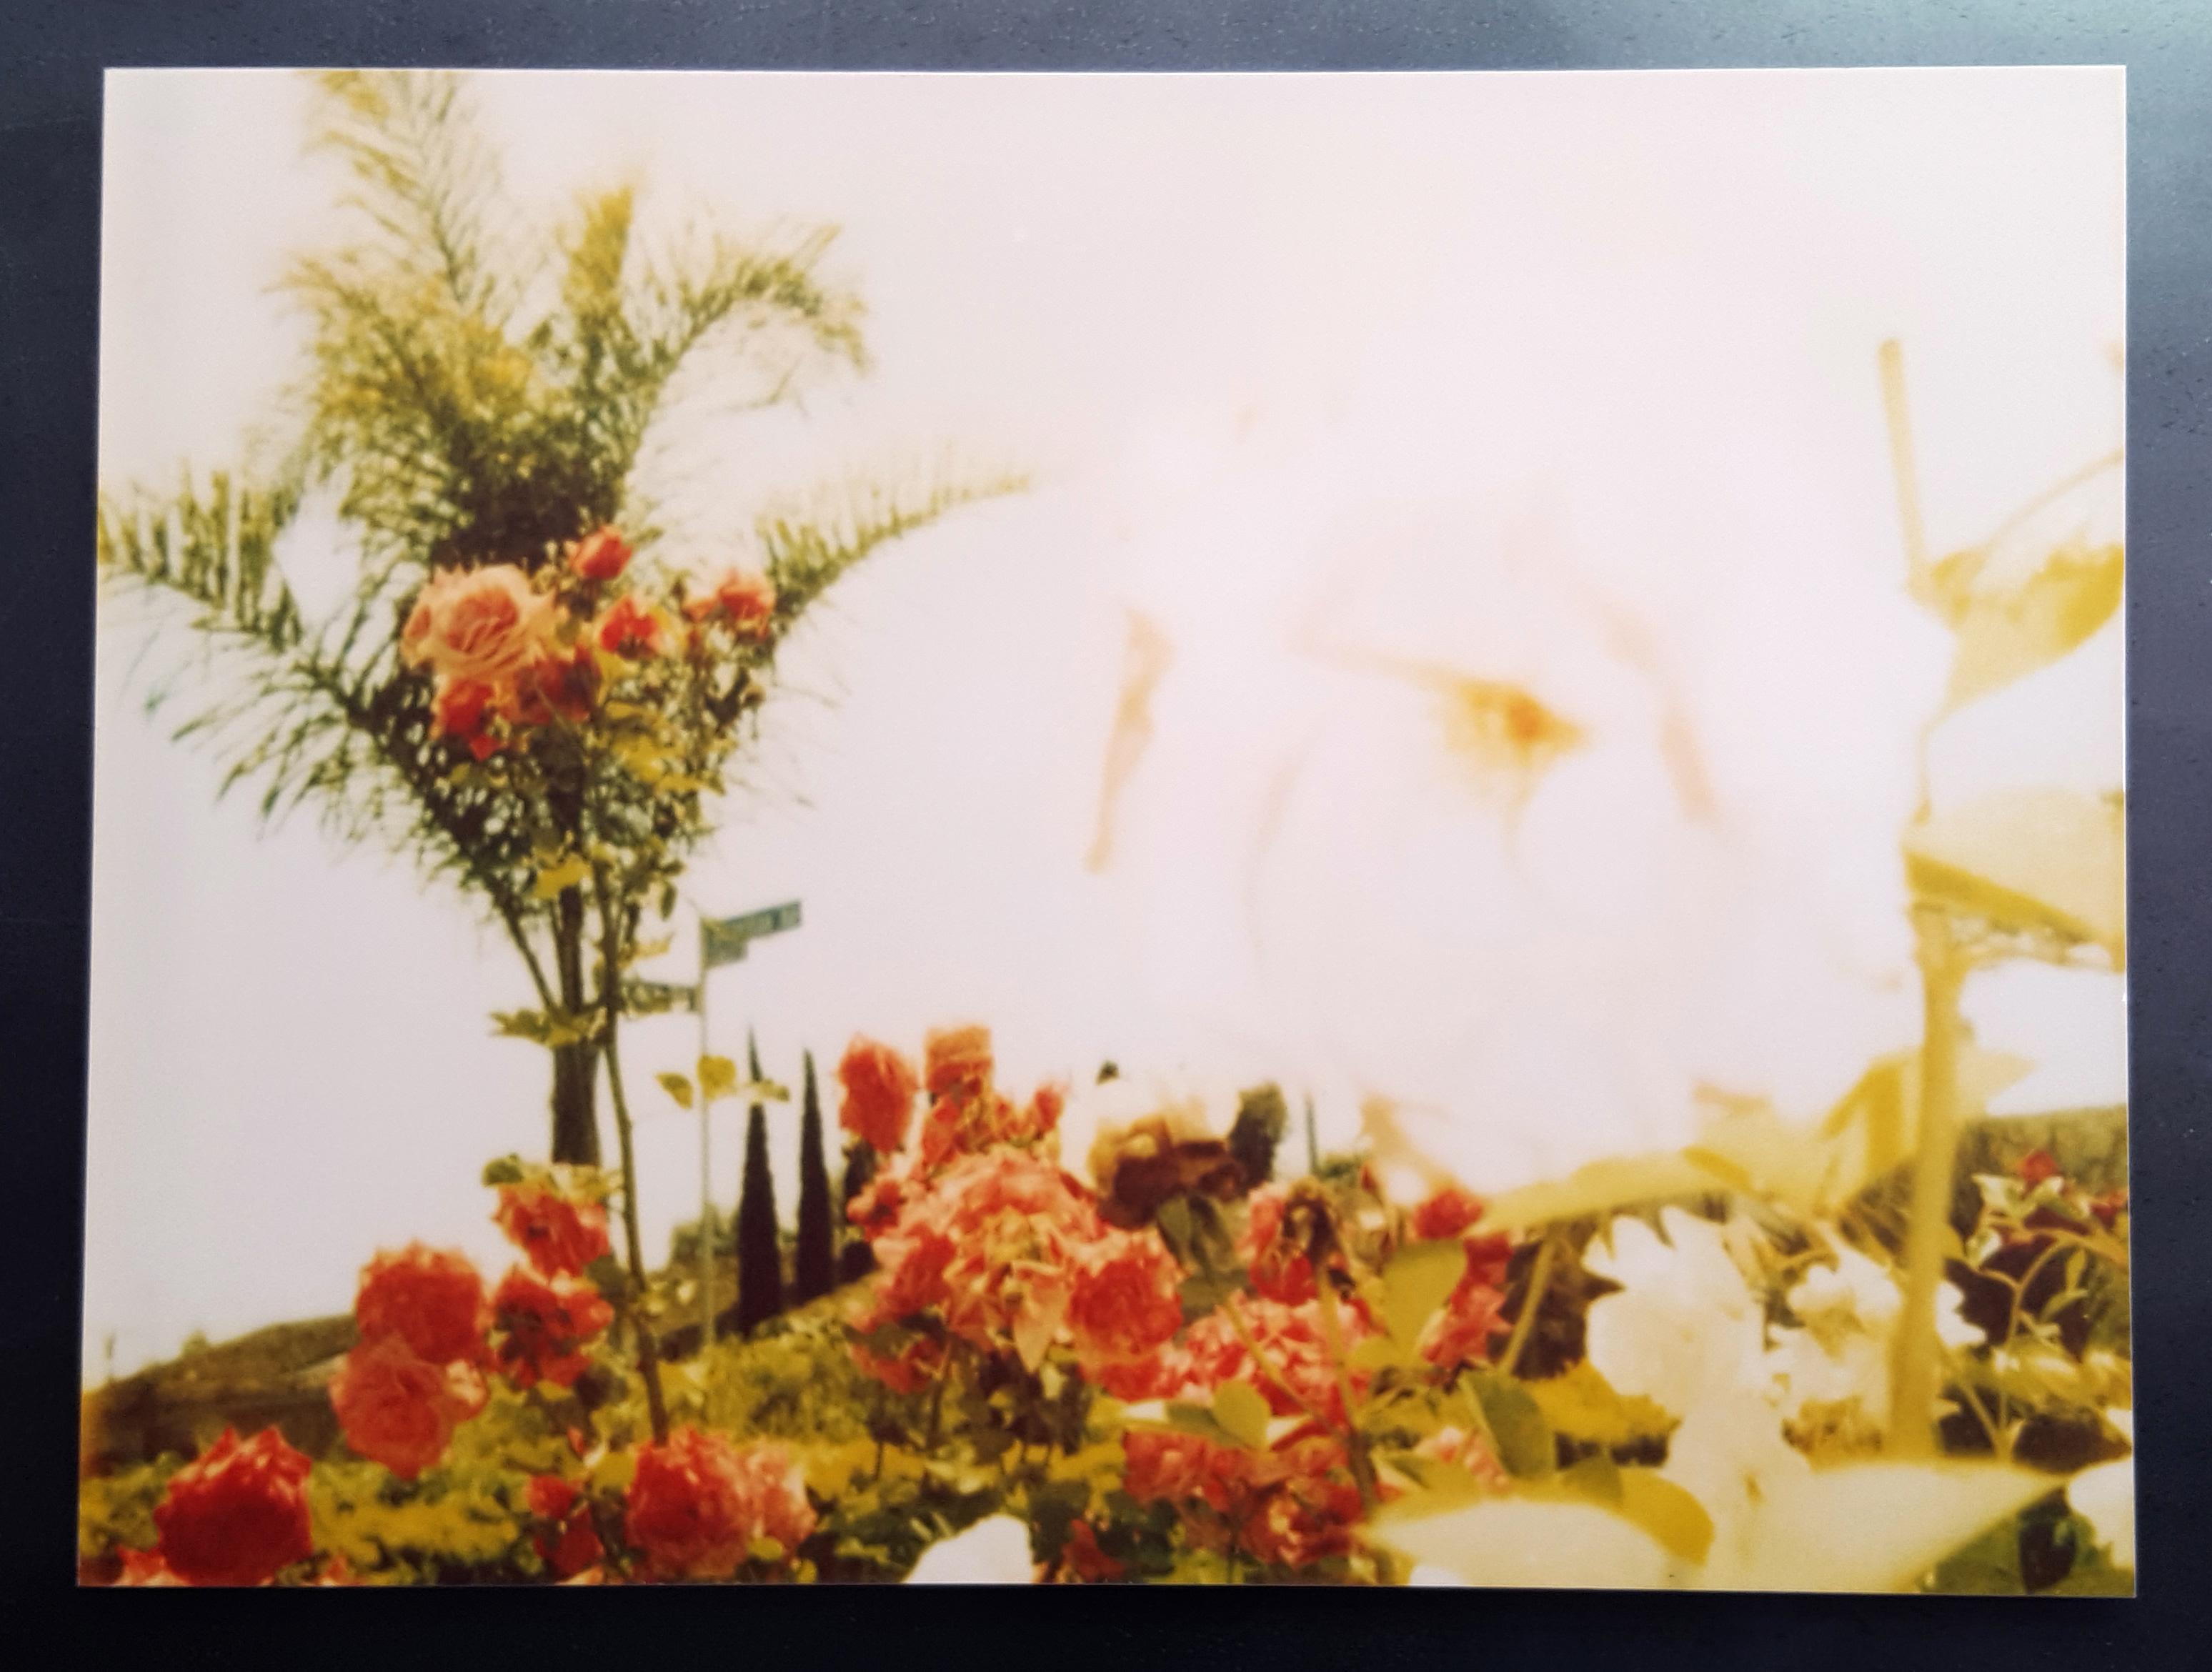 Pink Rose (Suburbia) - analog, mounted - Contemporary Photograph by Stefanie Schneider